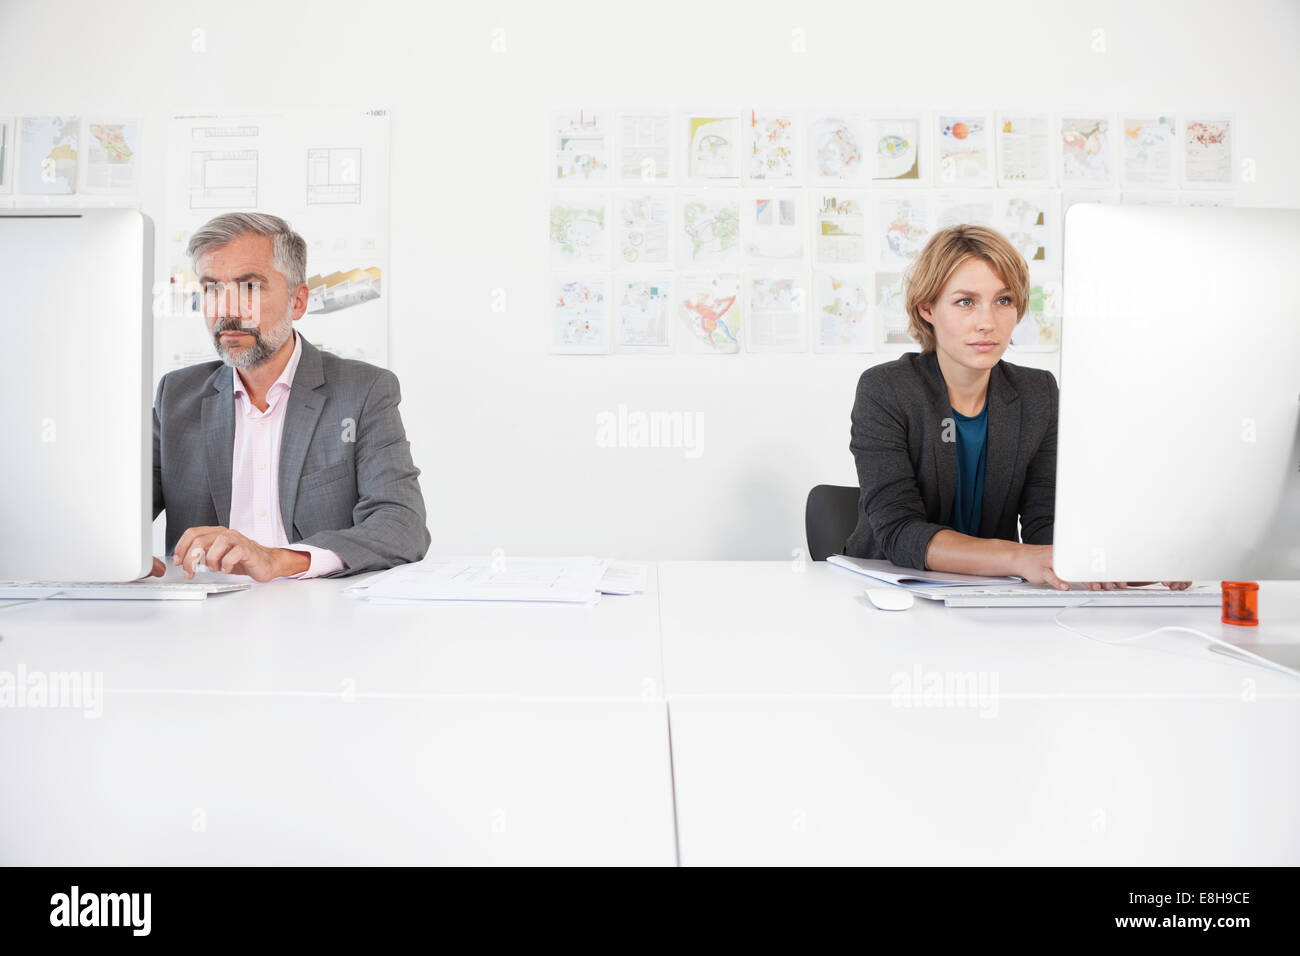 Two colleagues working side by side in an office Stock Photo